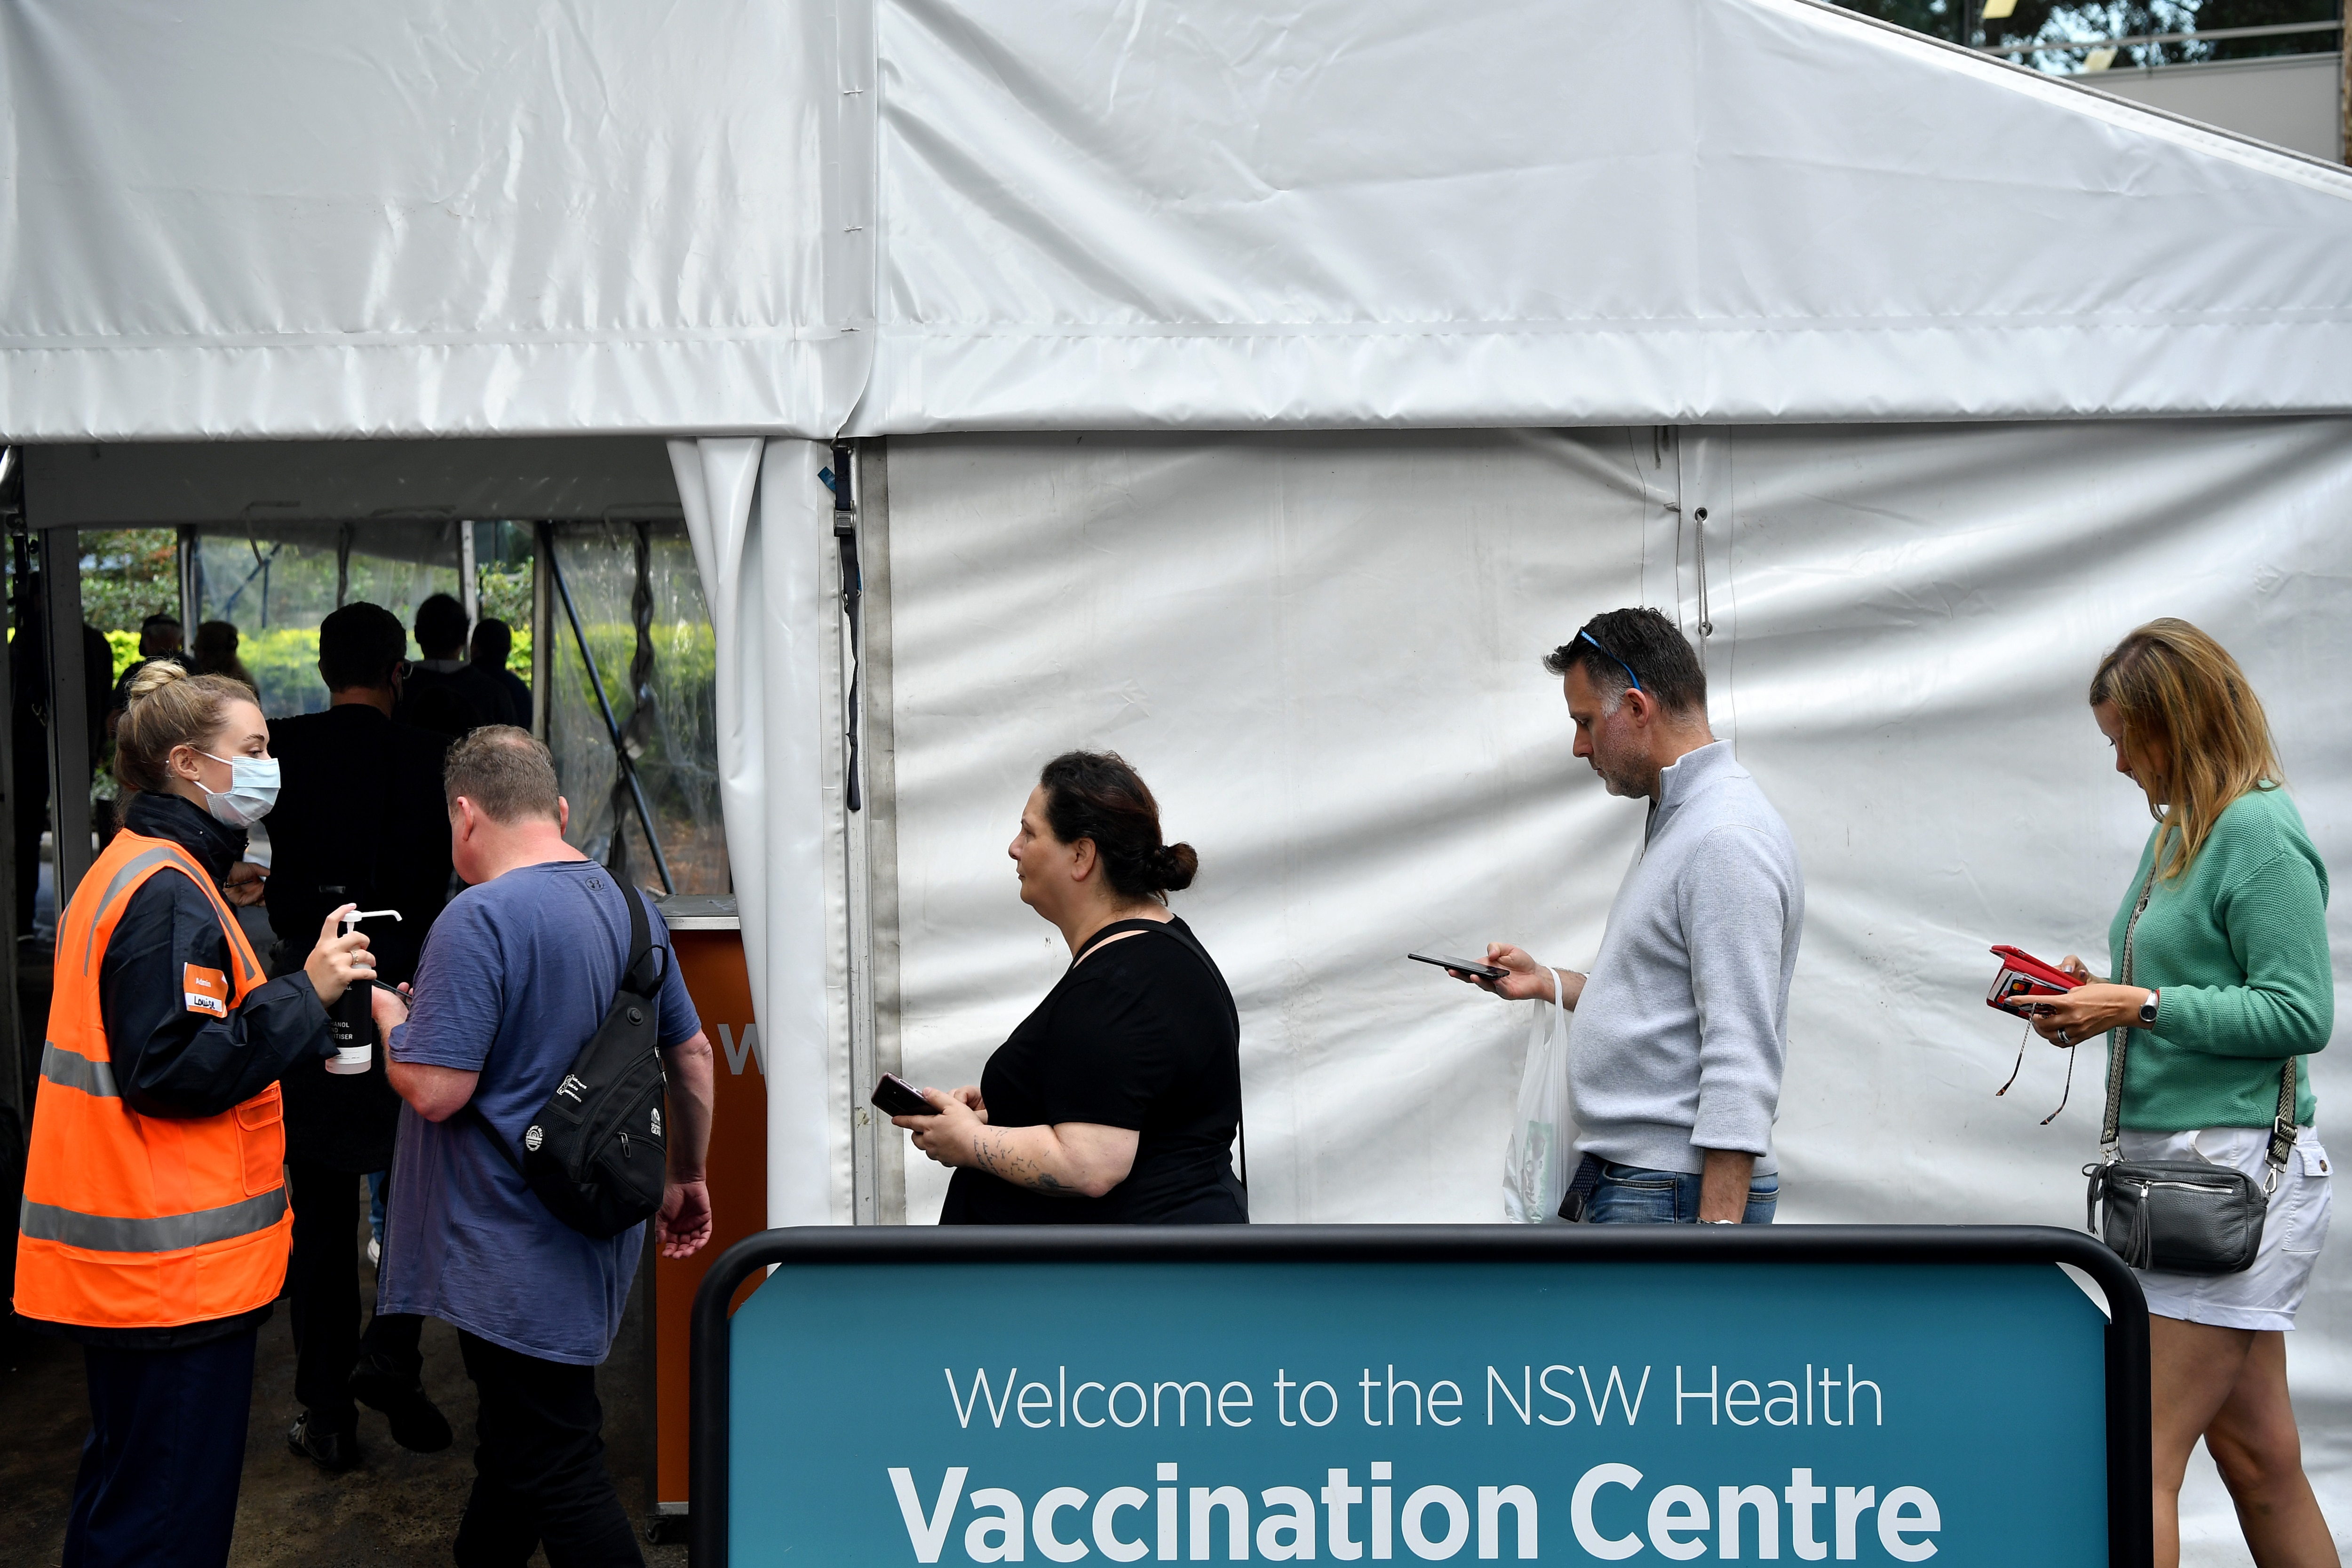 Members of the public wait for a vaccine at a mass COVID-19 vaccination hub in Sydney, Monday, May 24, 2021. (AAP Image/Joel Carrett) NO ARCHIVING